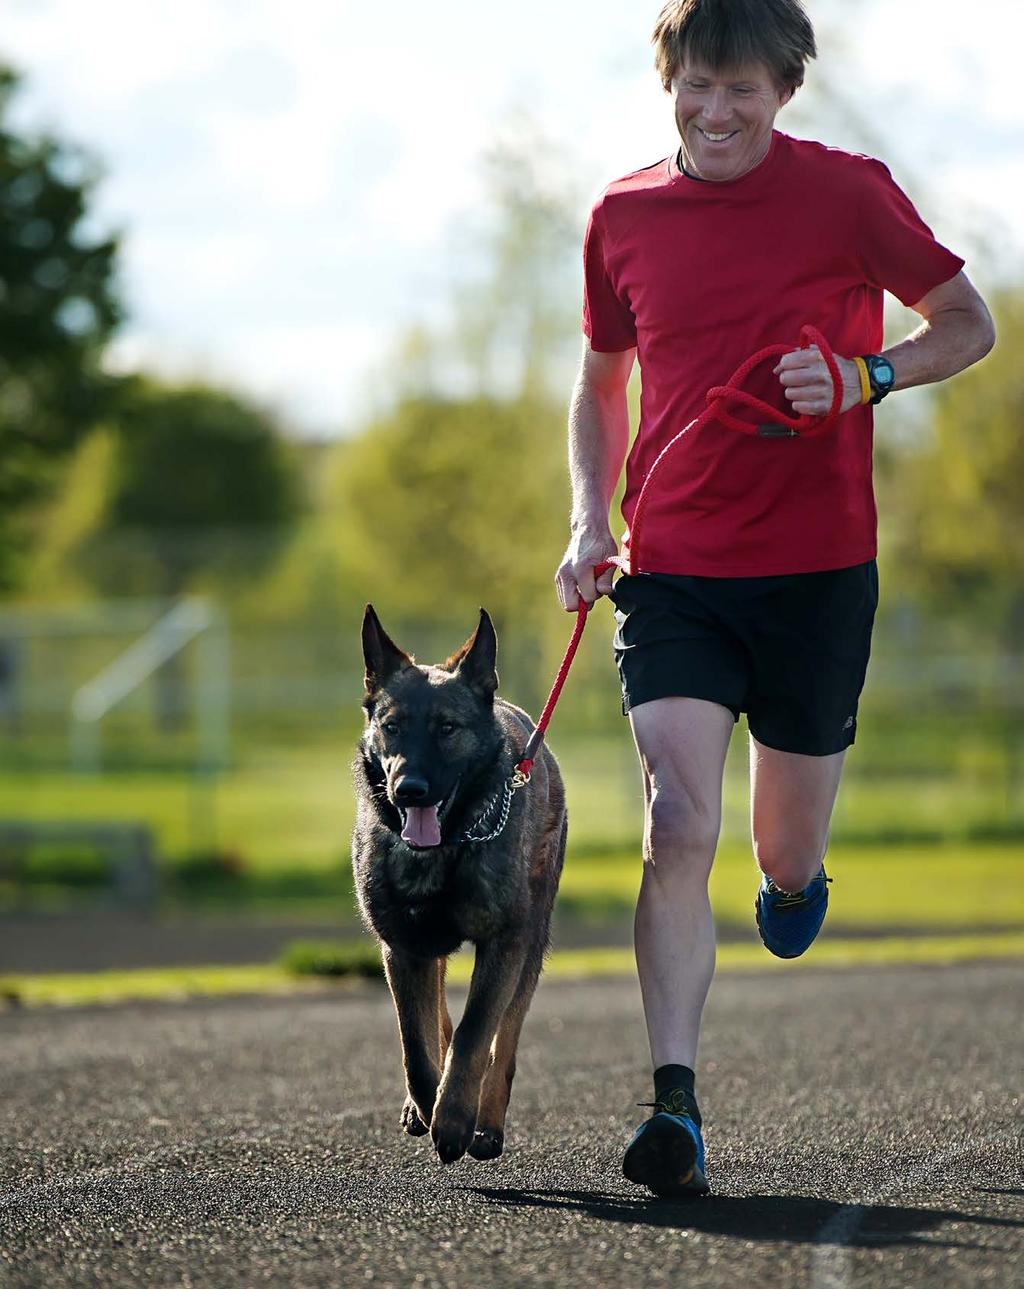 Improving Fracture Repair For Pets Improved bone Implants reduce complications of fracture repair Using the latest technology in bone implants, surgeon Noel Moens is helping to boost the success of